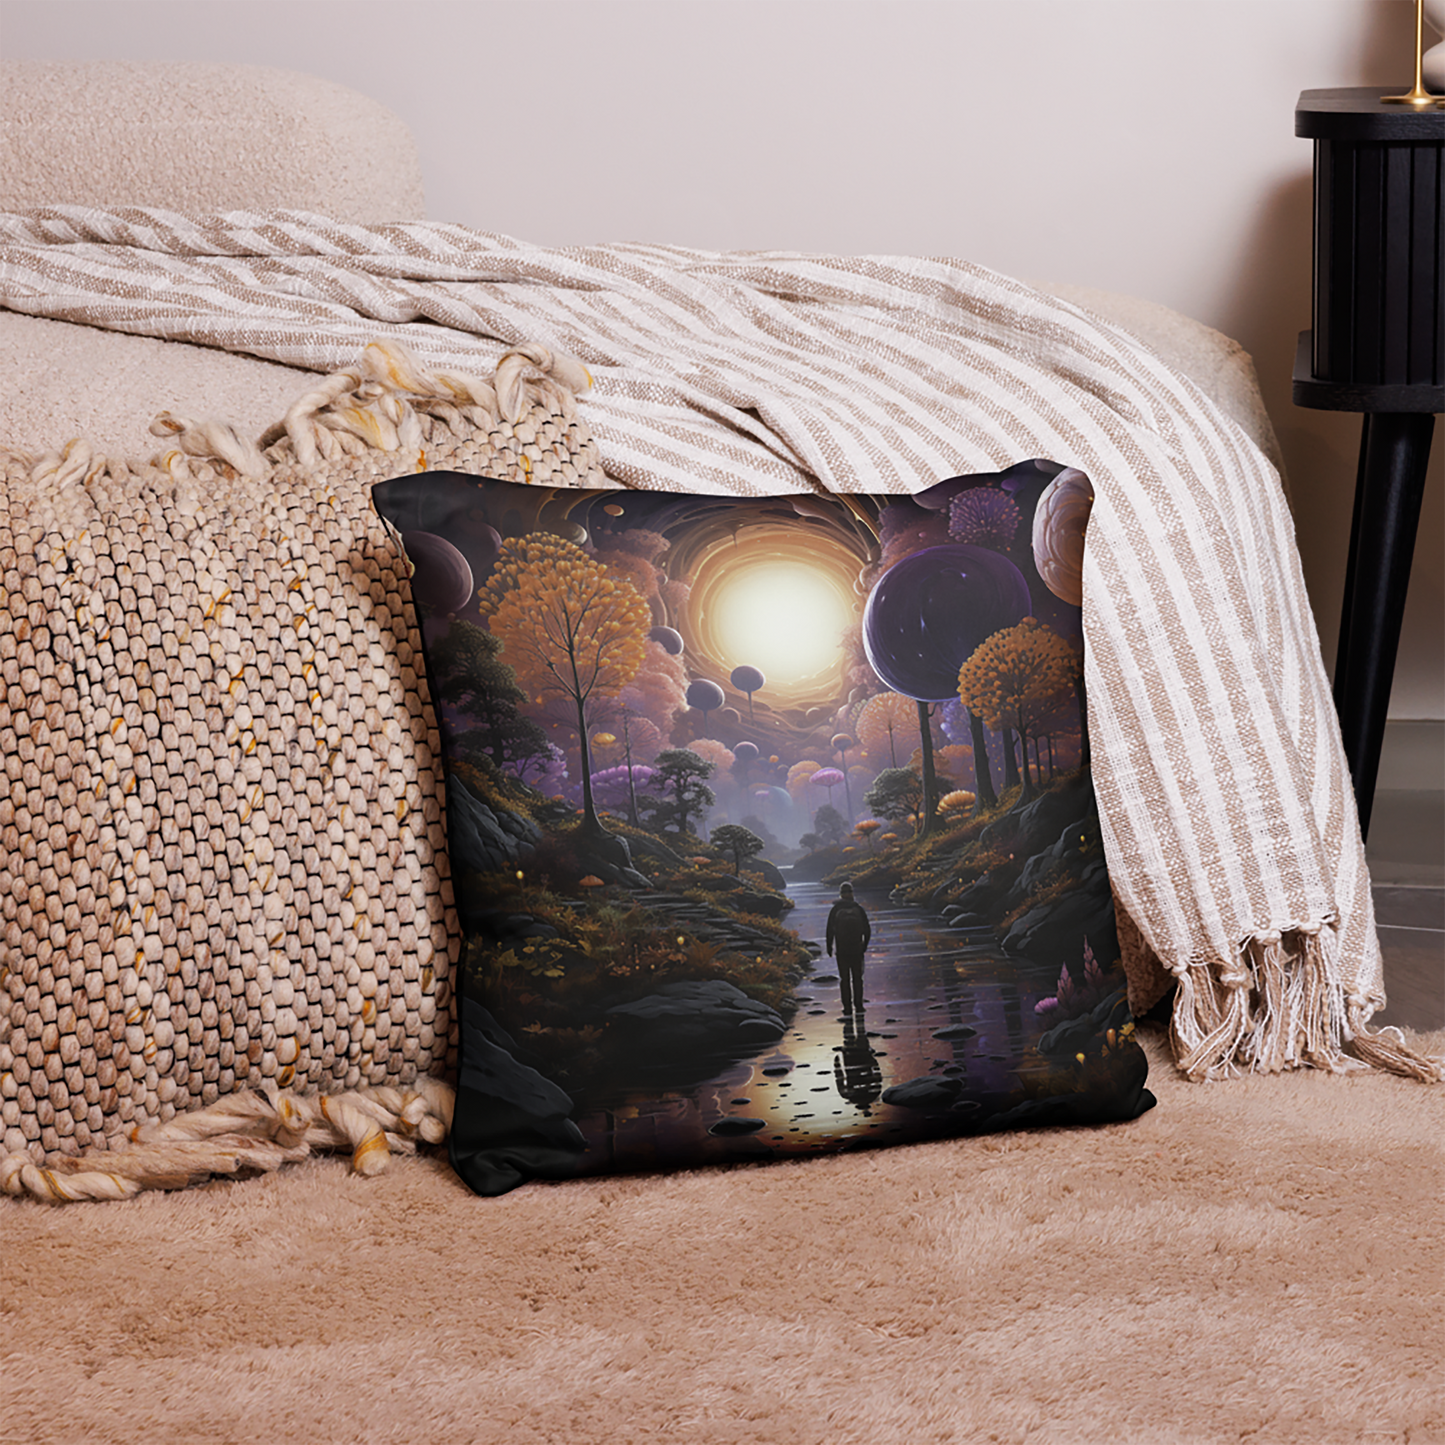 Space Throw Pillow Psychedelic Alien Forest Polyester Decorative Cushion 18x18